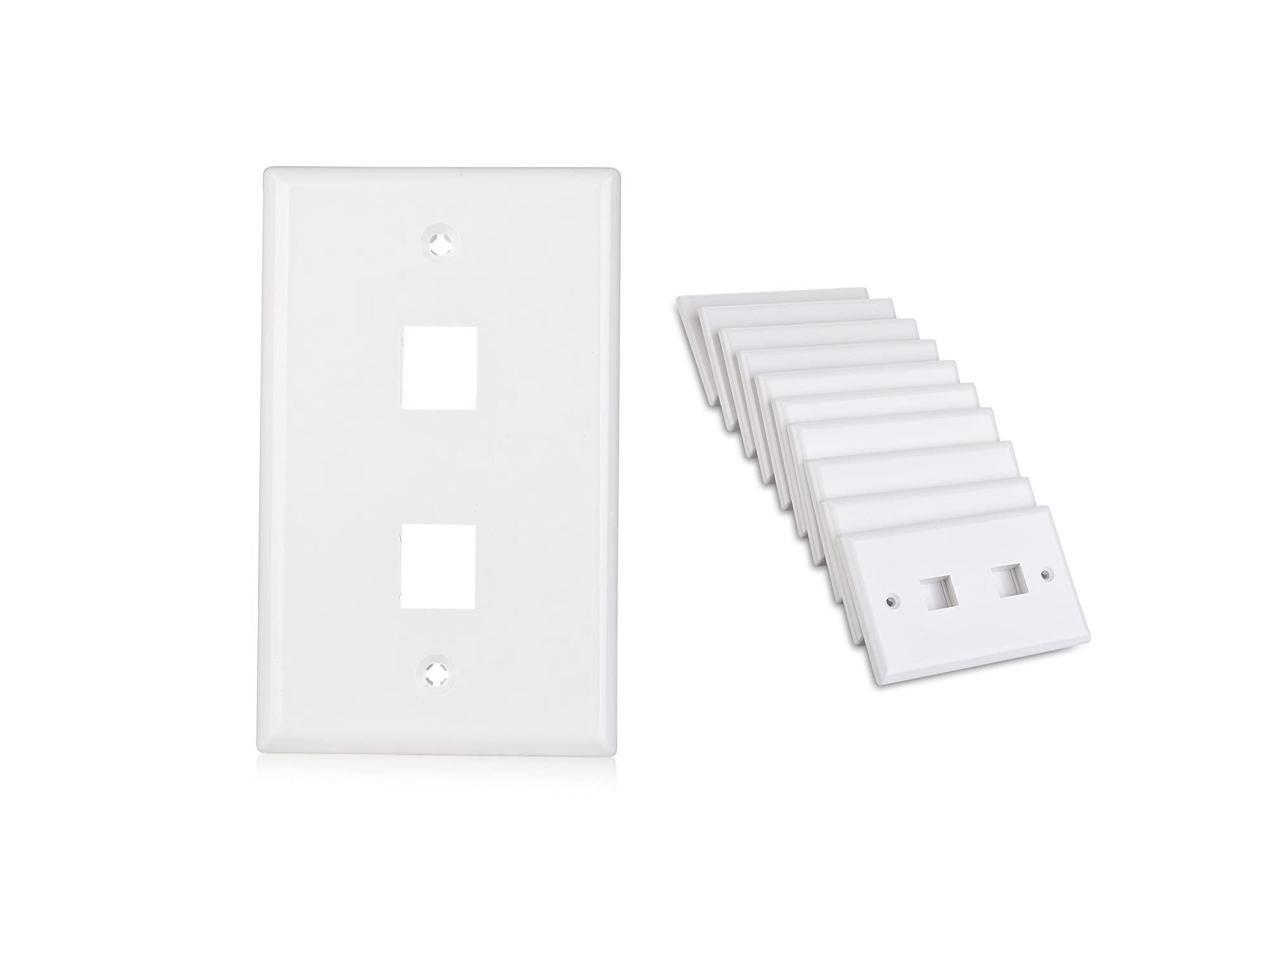 Cable Matters UL Listed 10-Pack Wall Plate with 2-Port Keystone Jack in White 